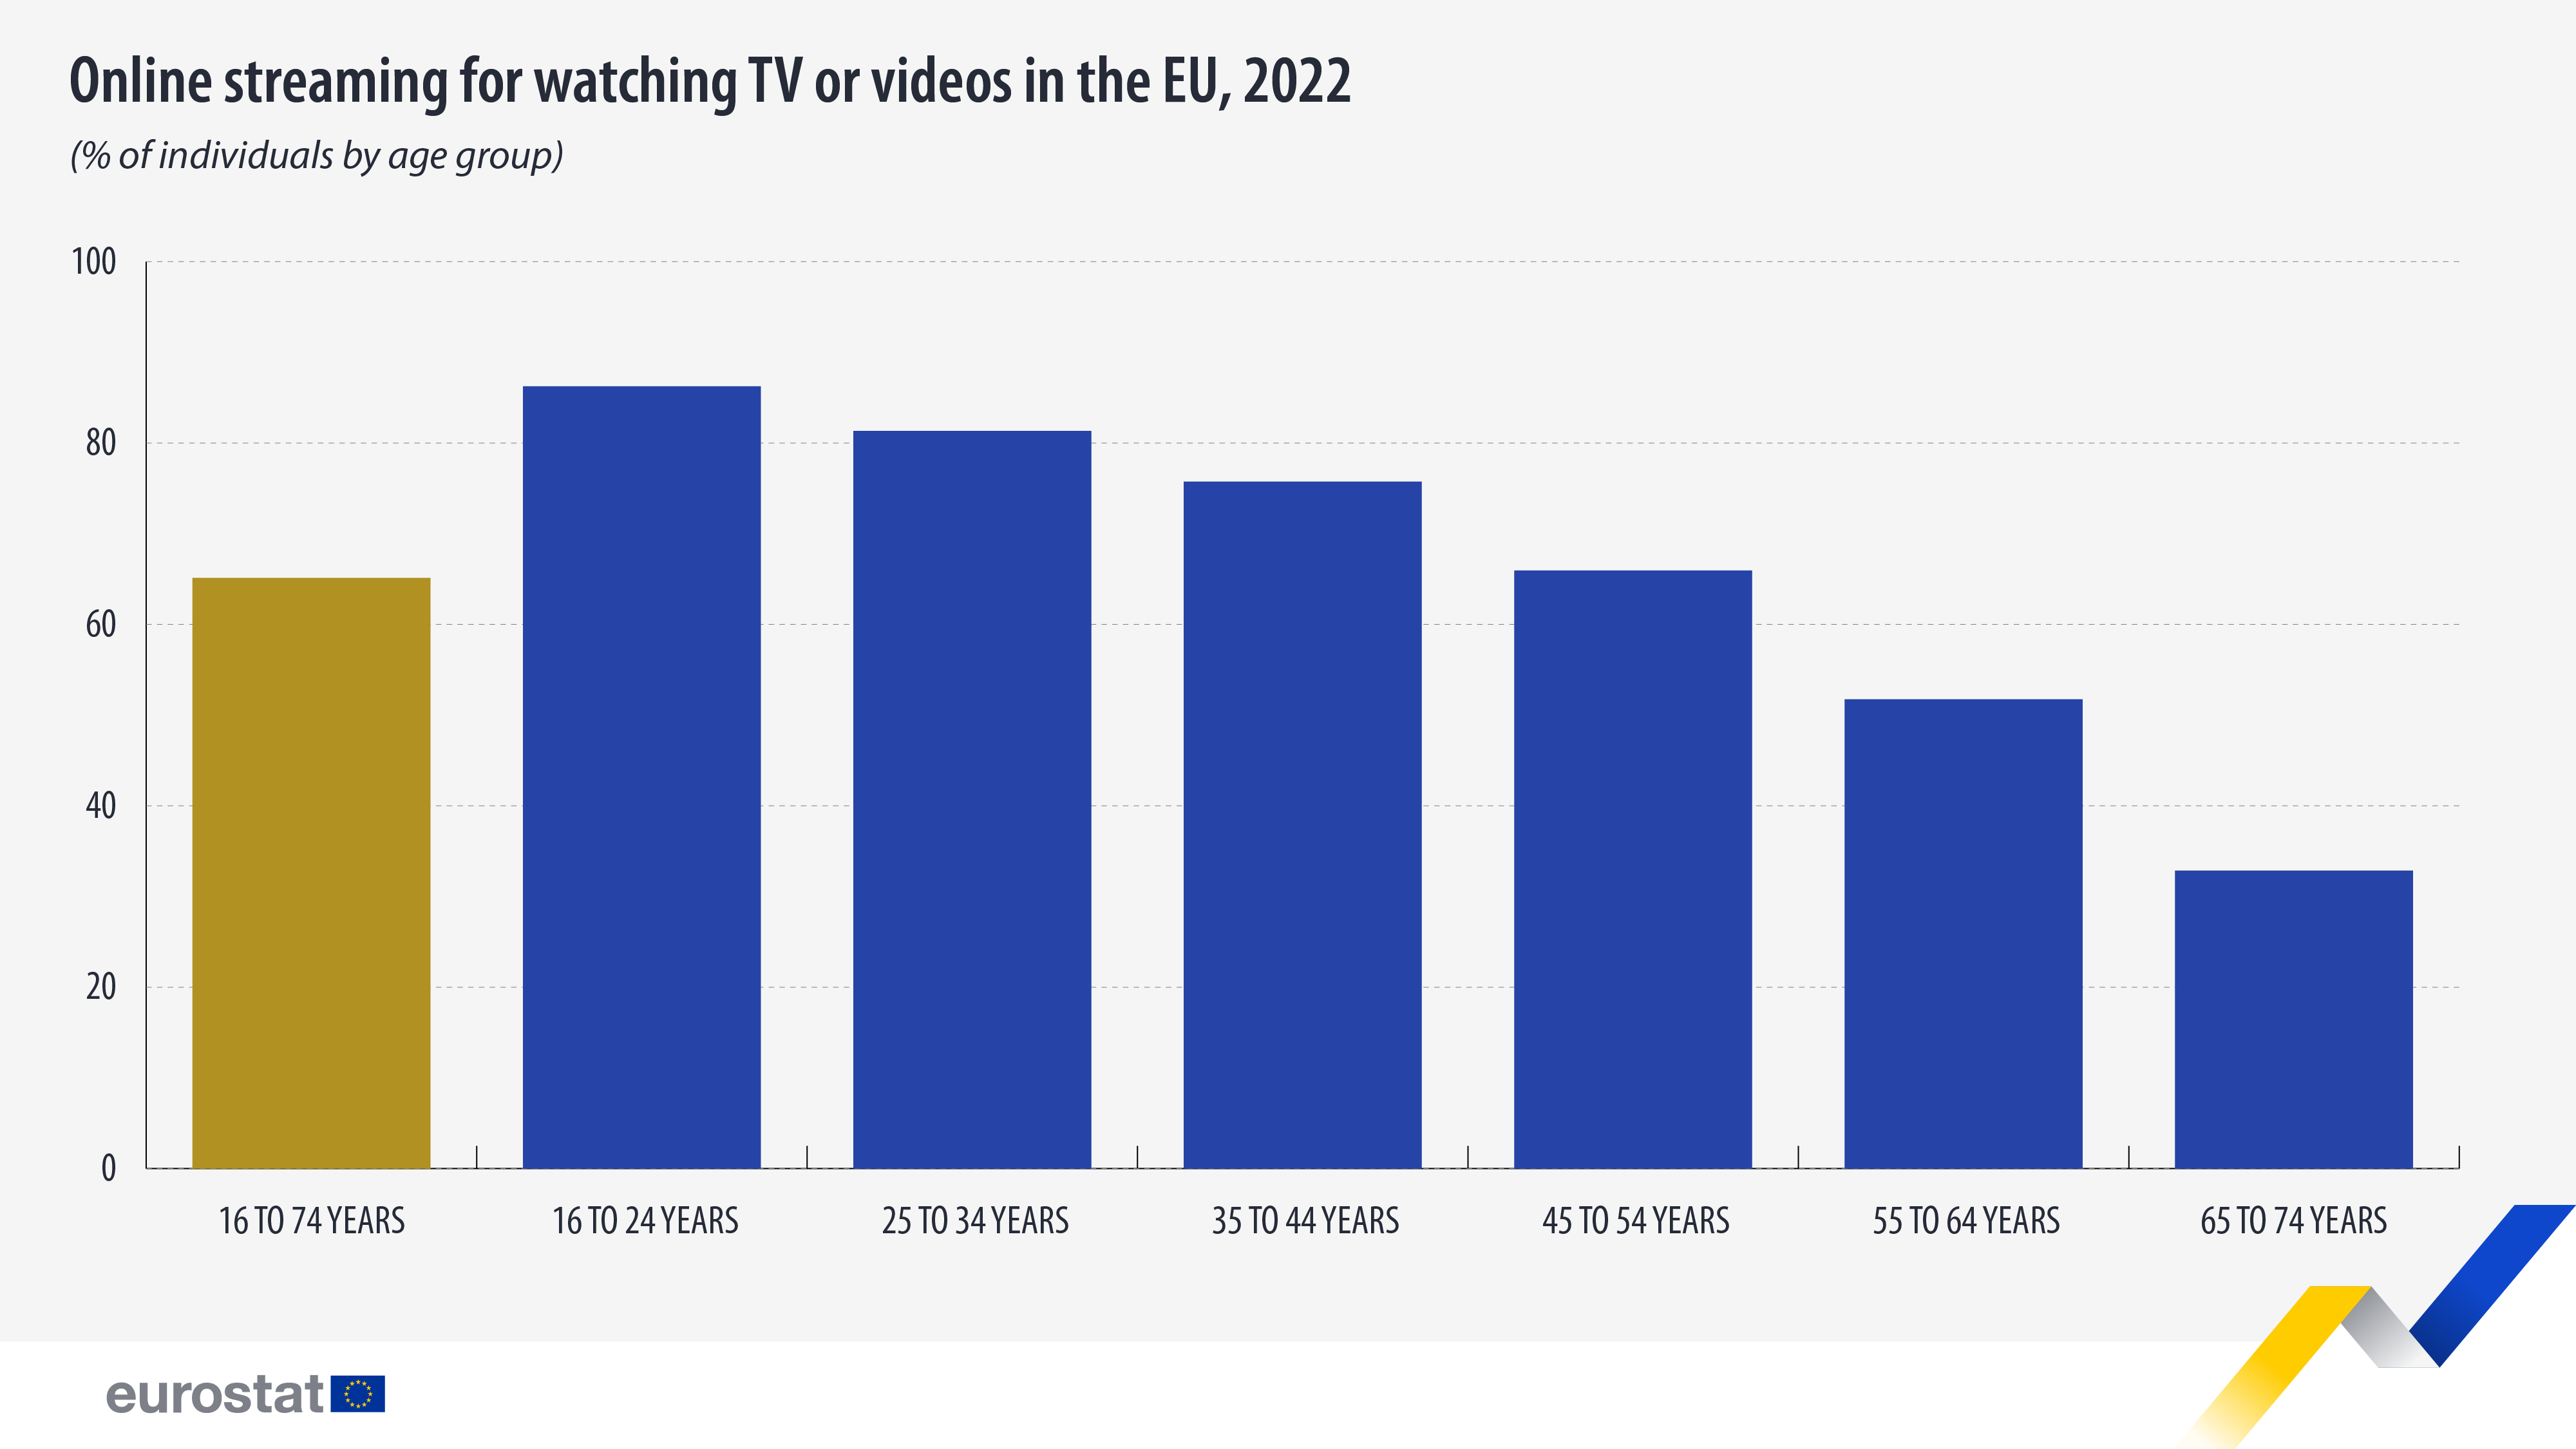 65% of people in the EU streamed TV or videos in 2022 - Eurostat